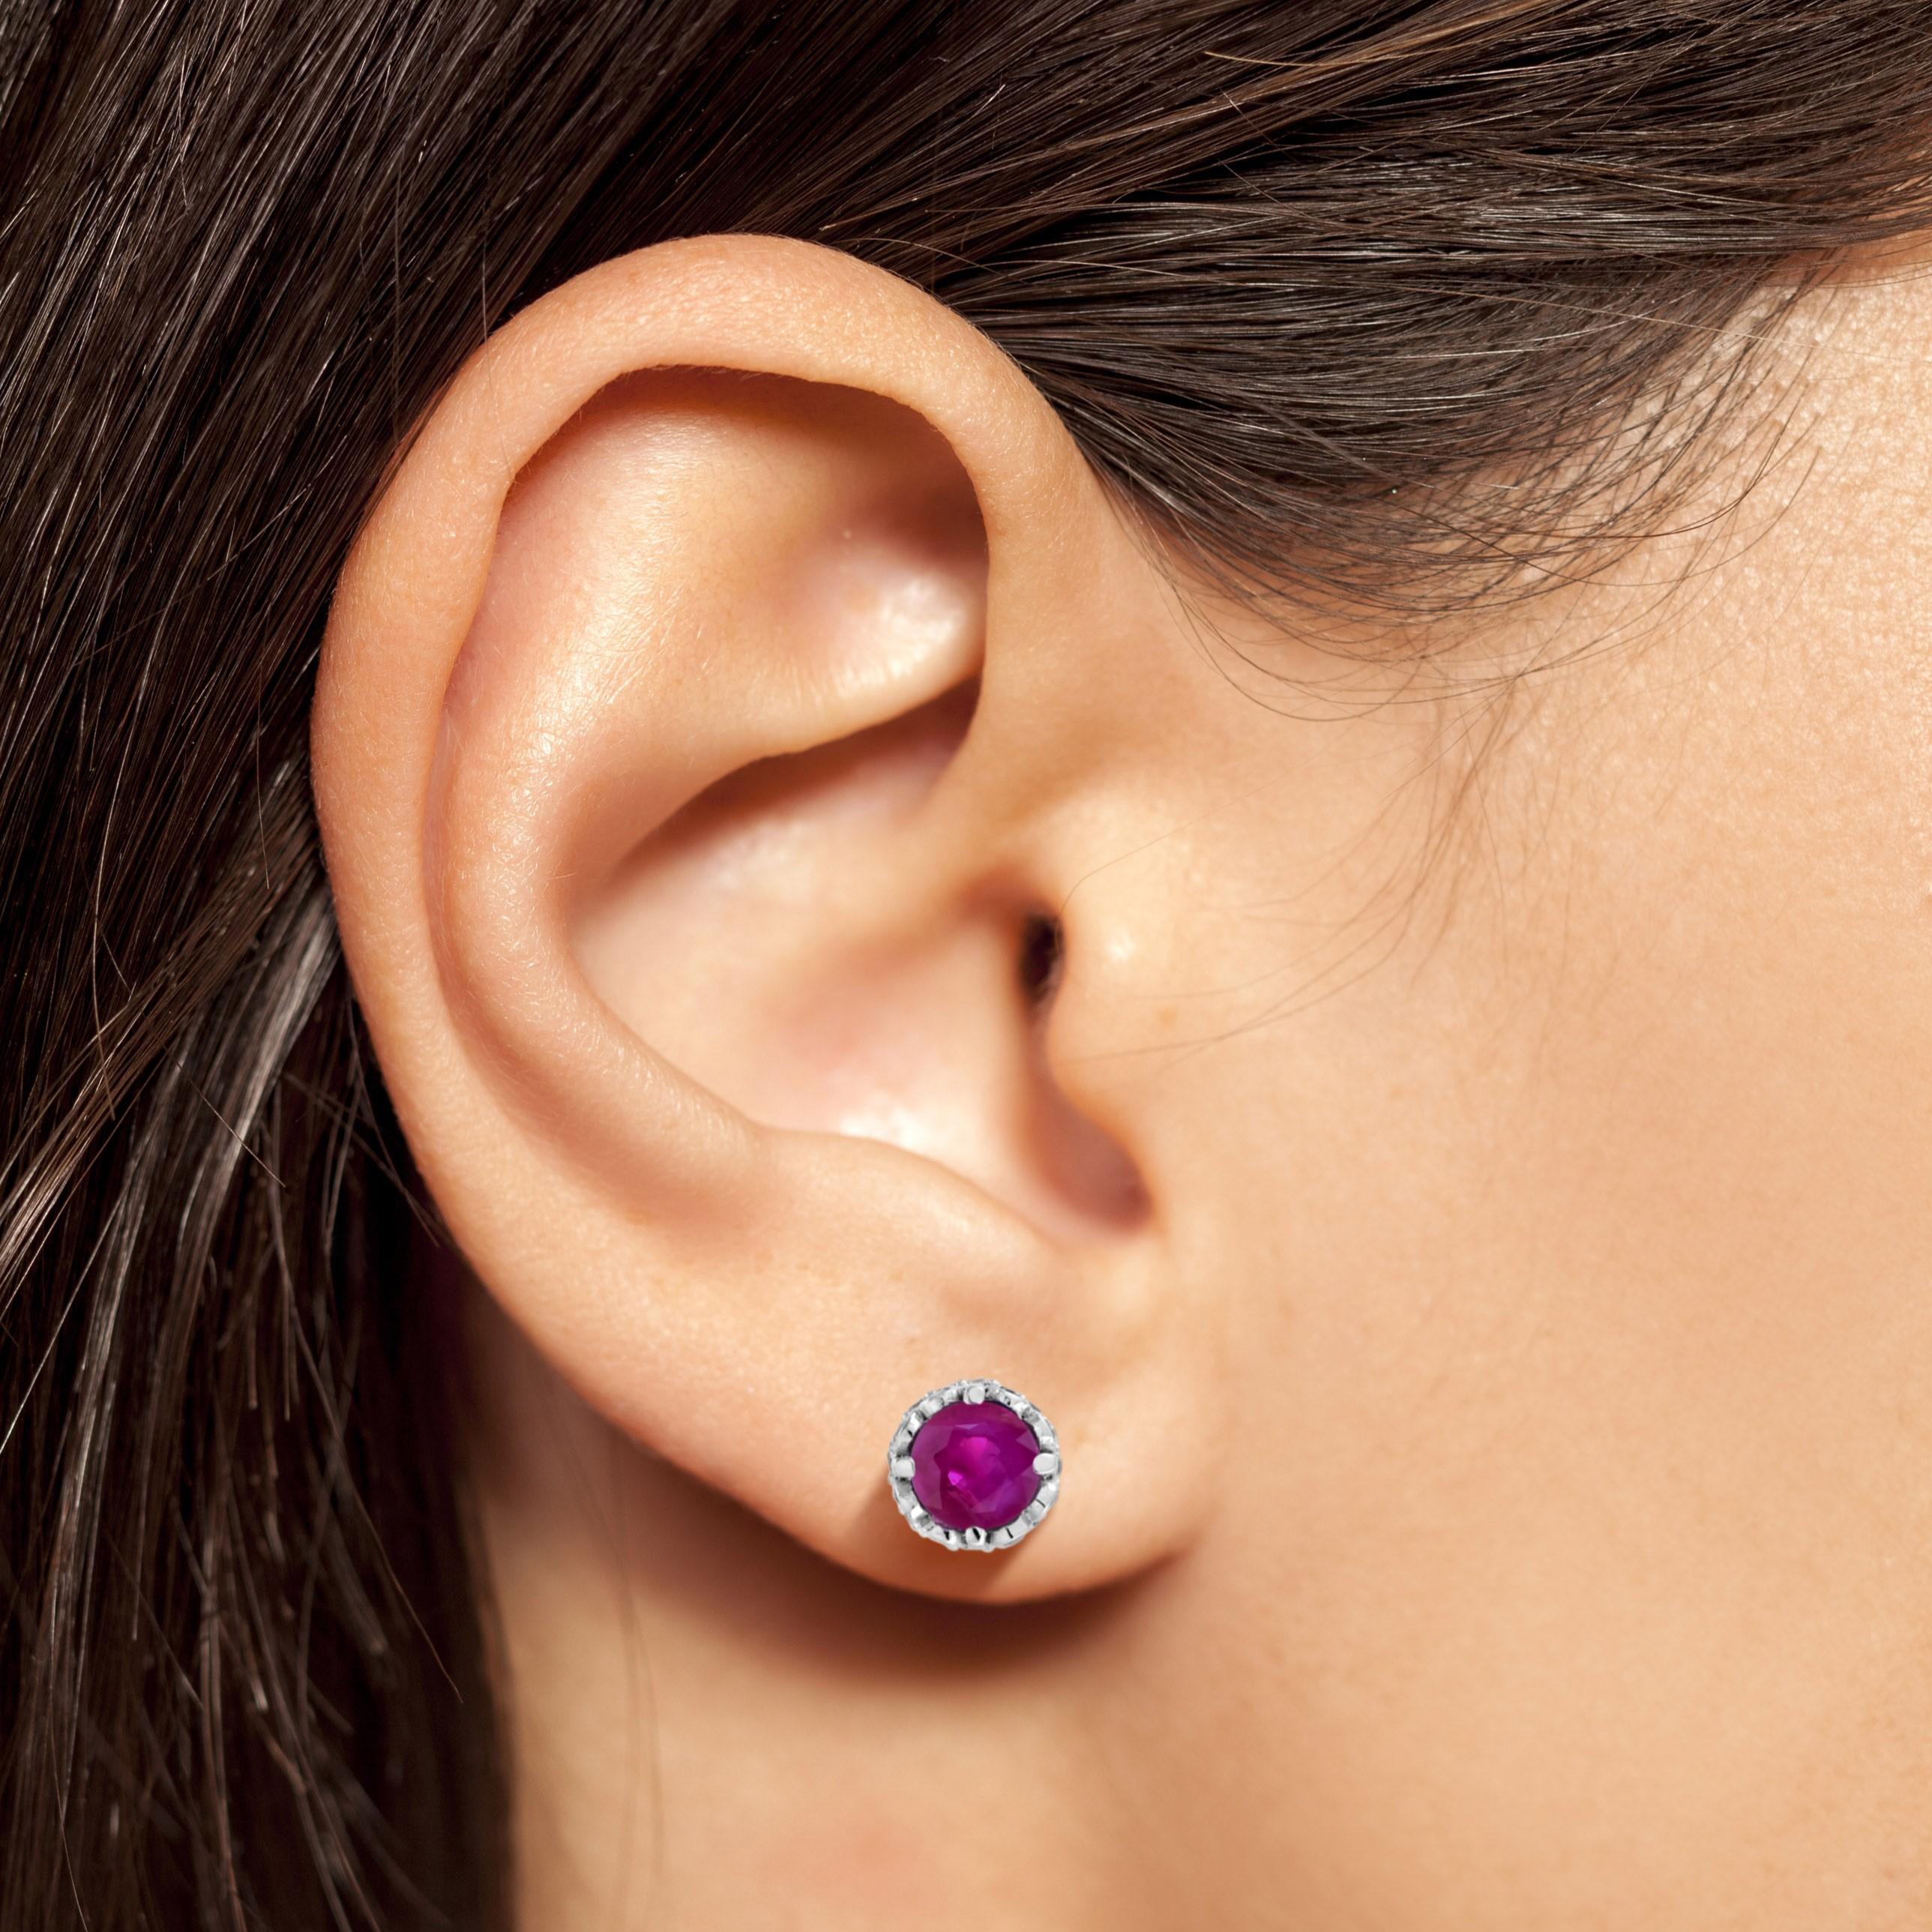 Simple, yet elegant, these earrings have a ruby center stone with an enhanced design to add to the sparkle. Perfect for those casual occasions where you want to add a little bling. Or perfect to add an understated sparkle for a more formal occasion.